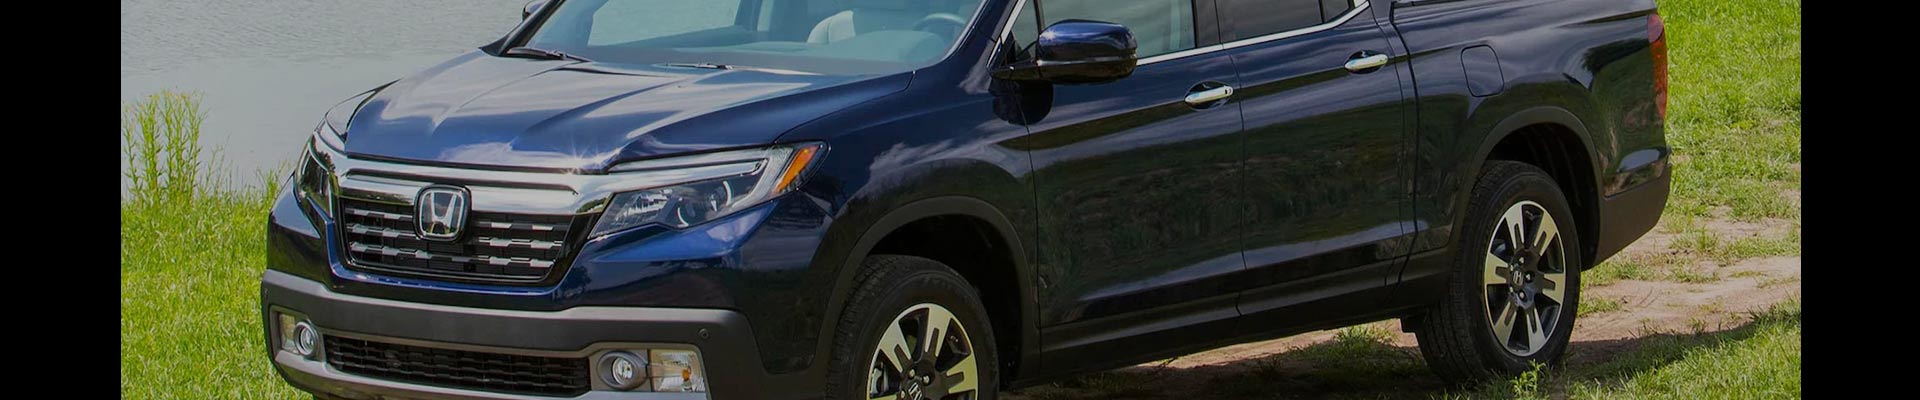 Shop Replacement and OEM 2017 Honda Ridgeline Parts with Discounted Price on the Net